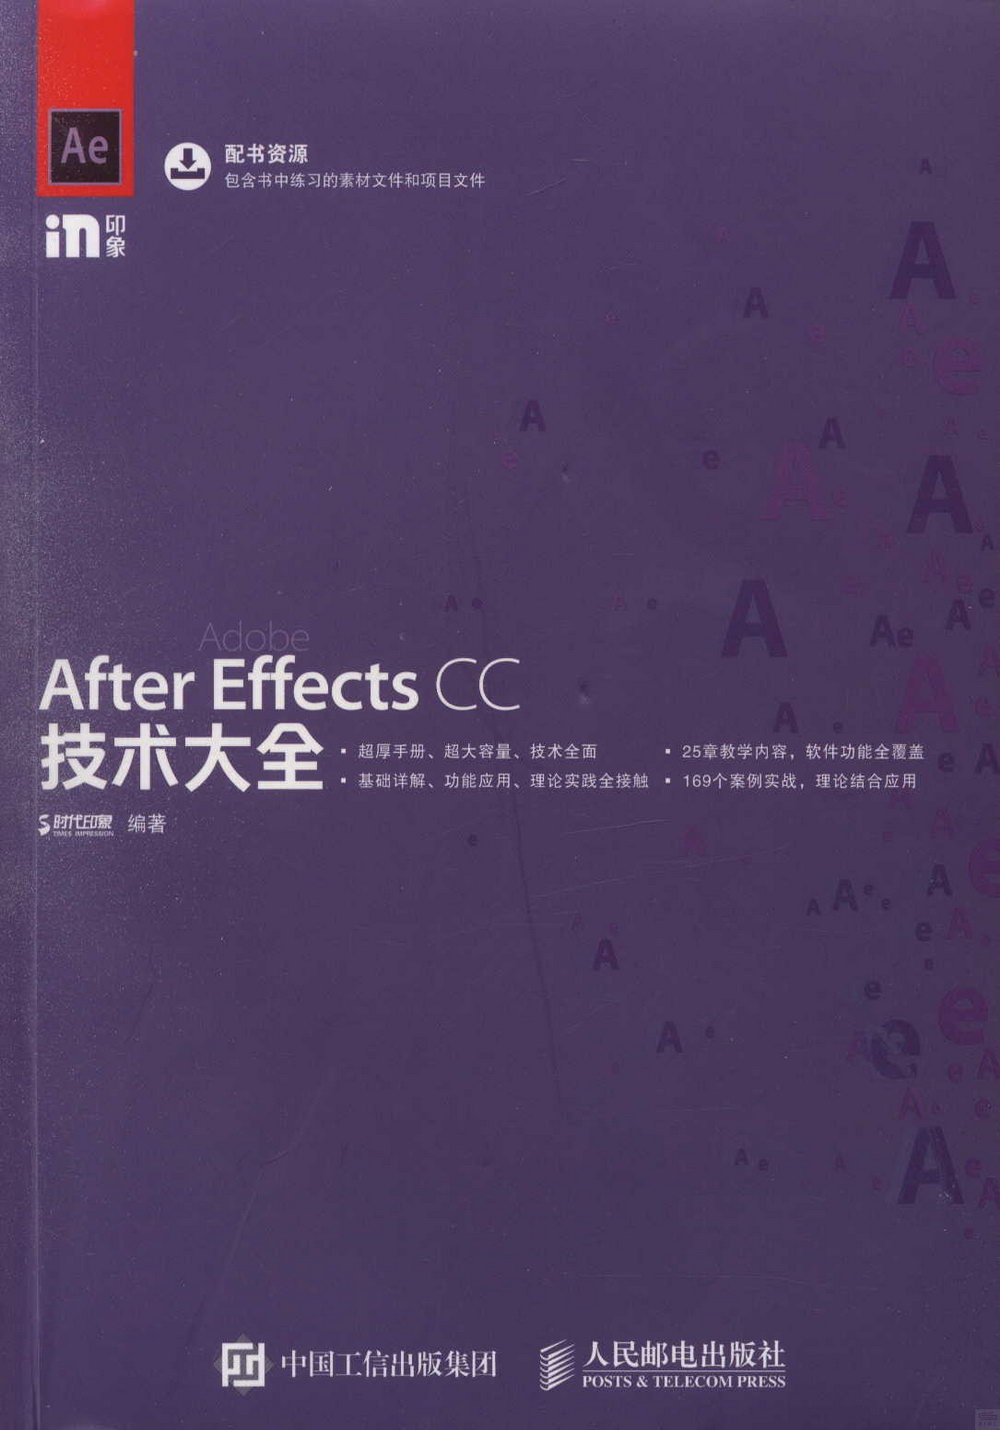 After Effects CC技術大全